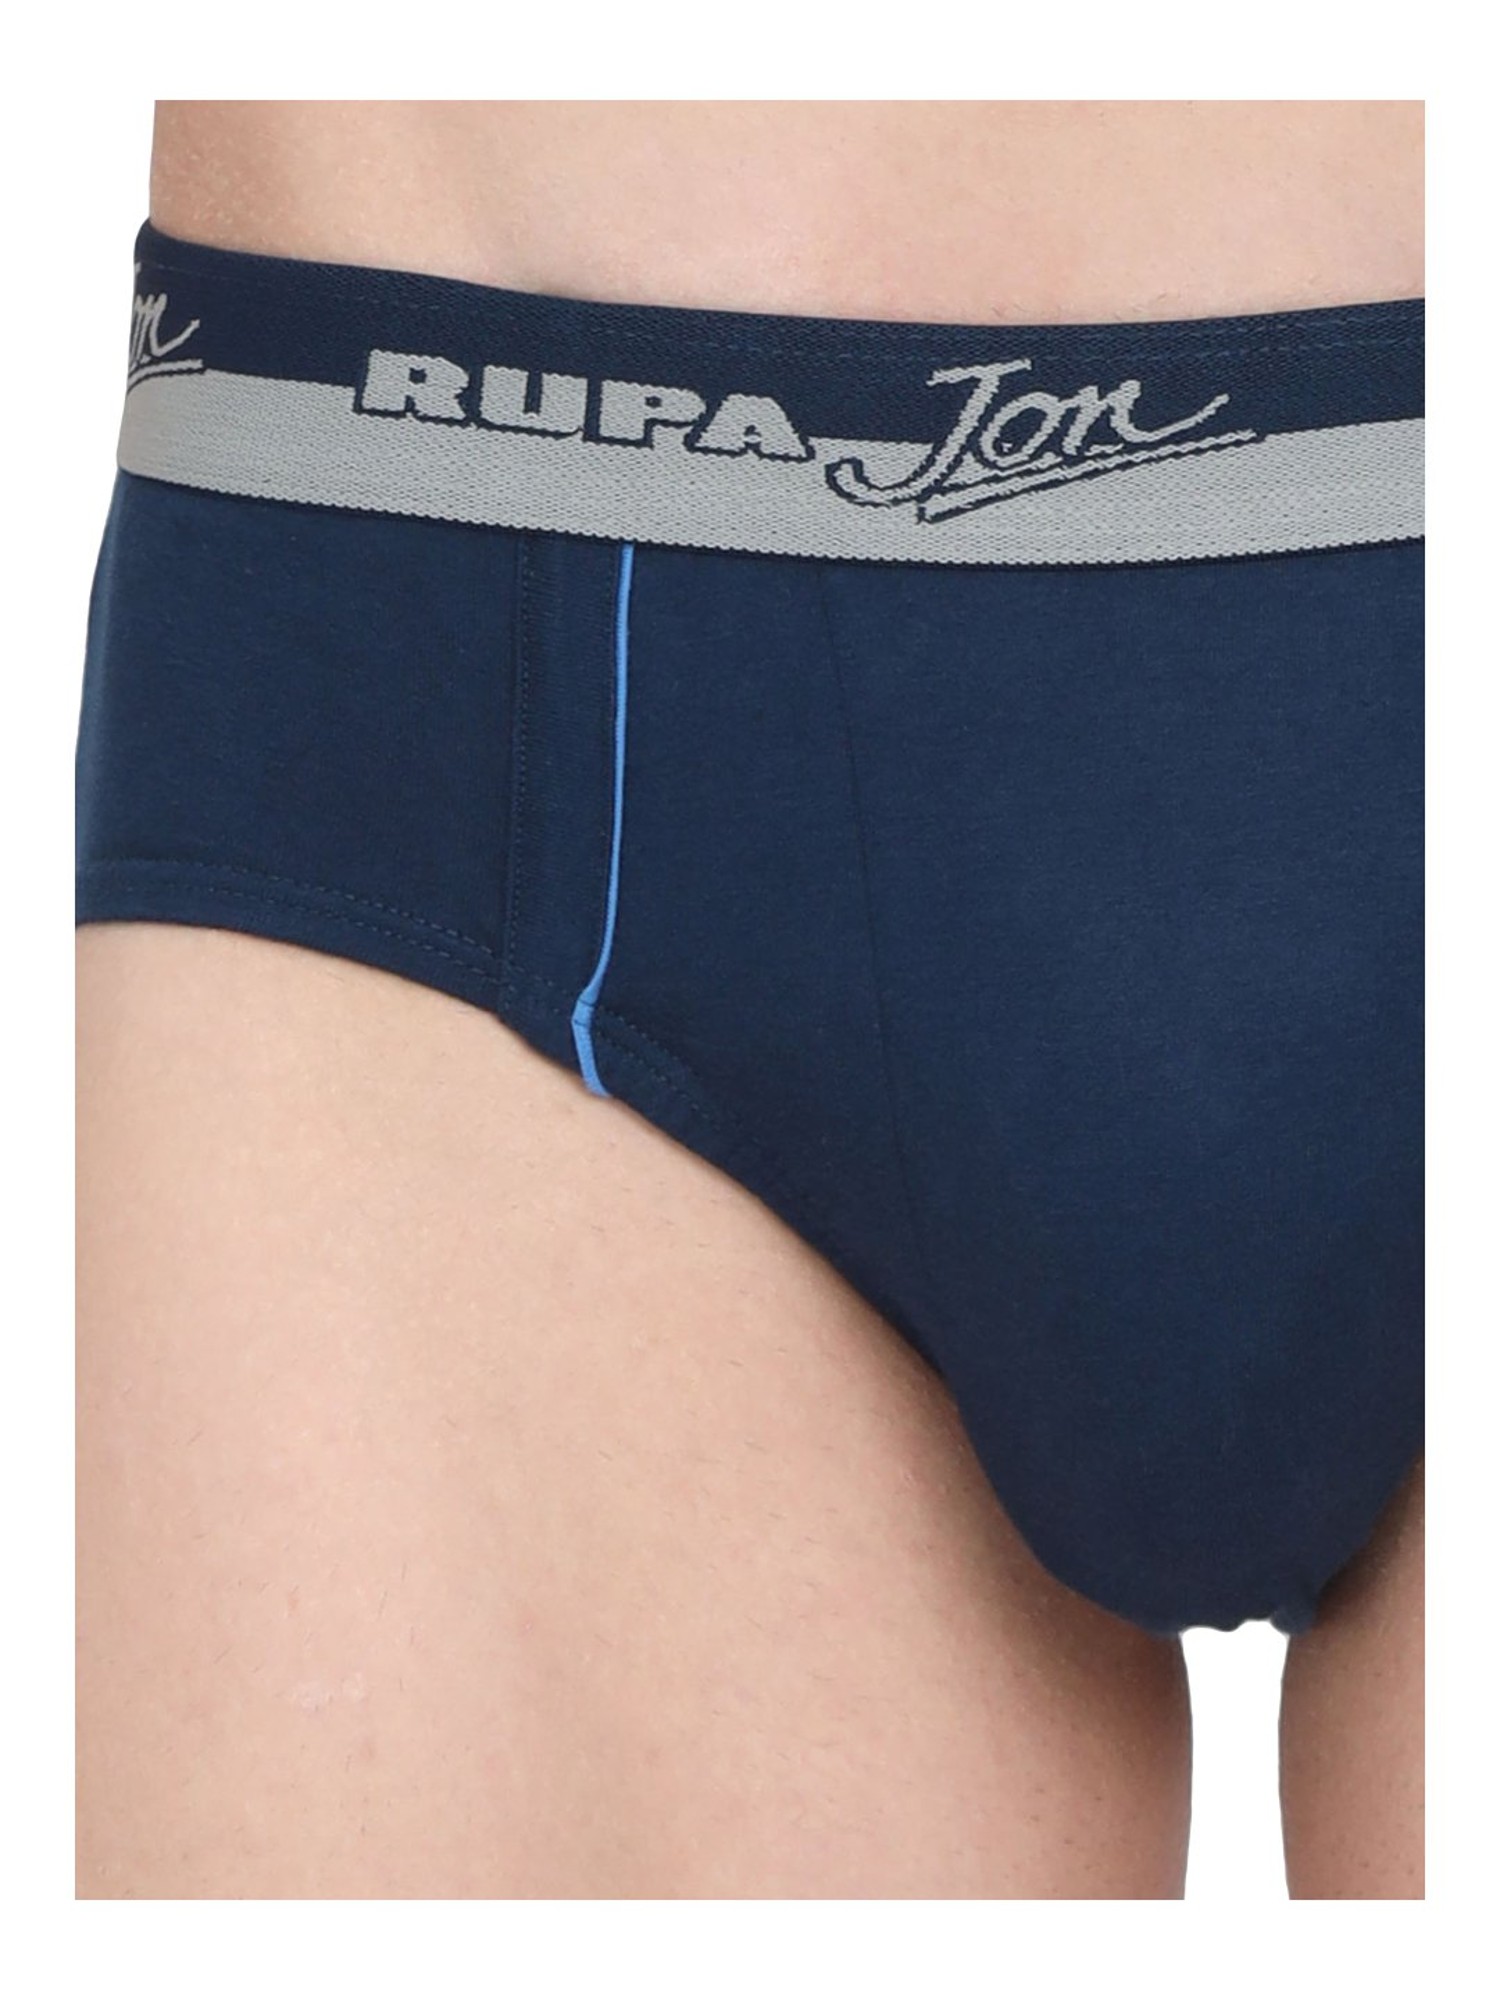 Rupa Underwear Boxer Underpant inner wear for men 3 Pieces Combo Pack